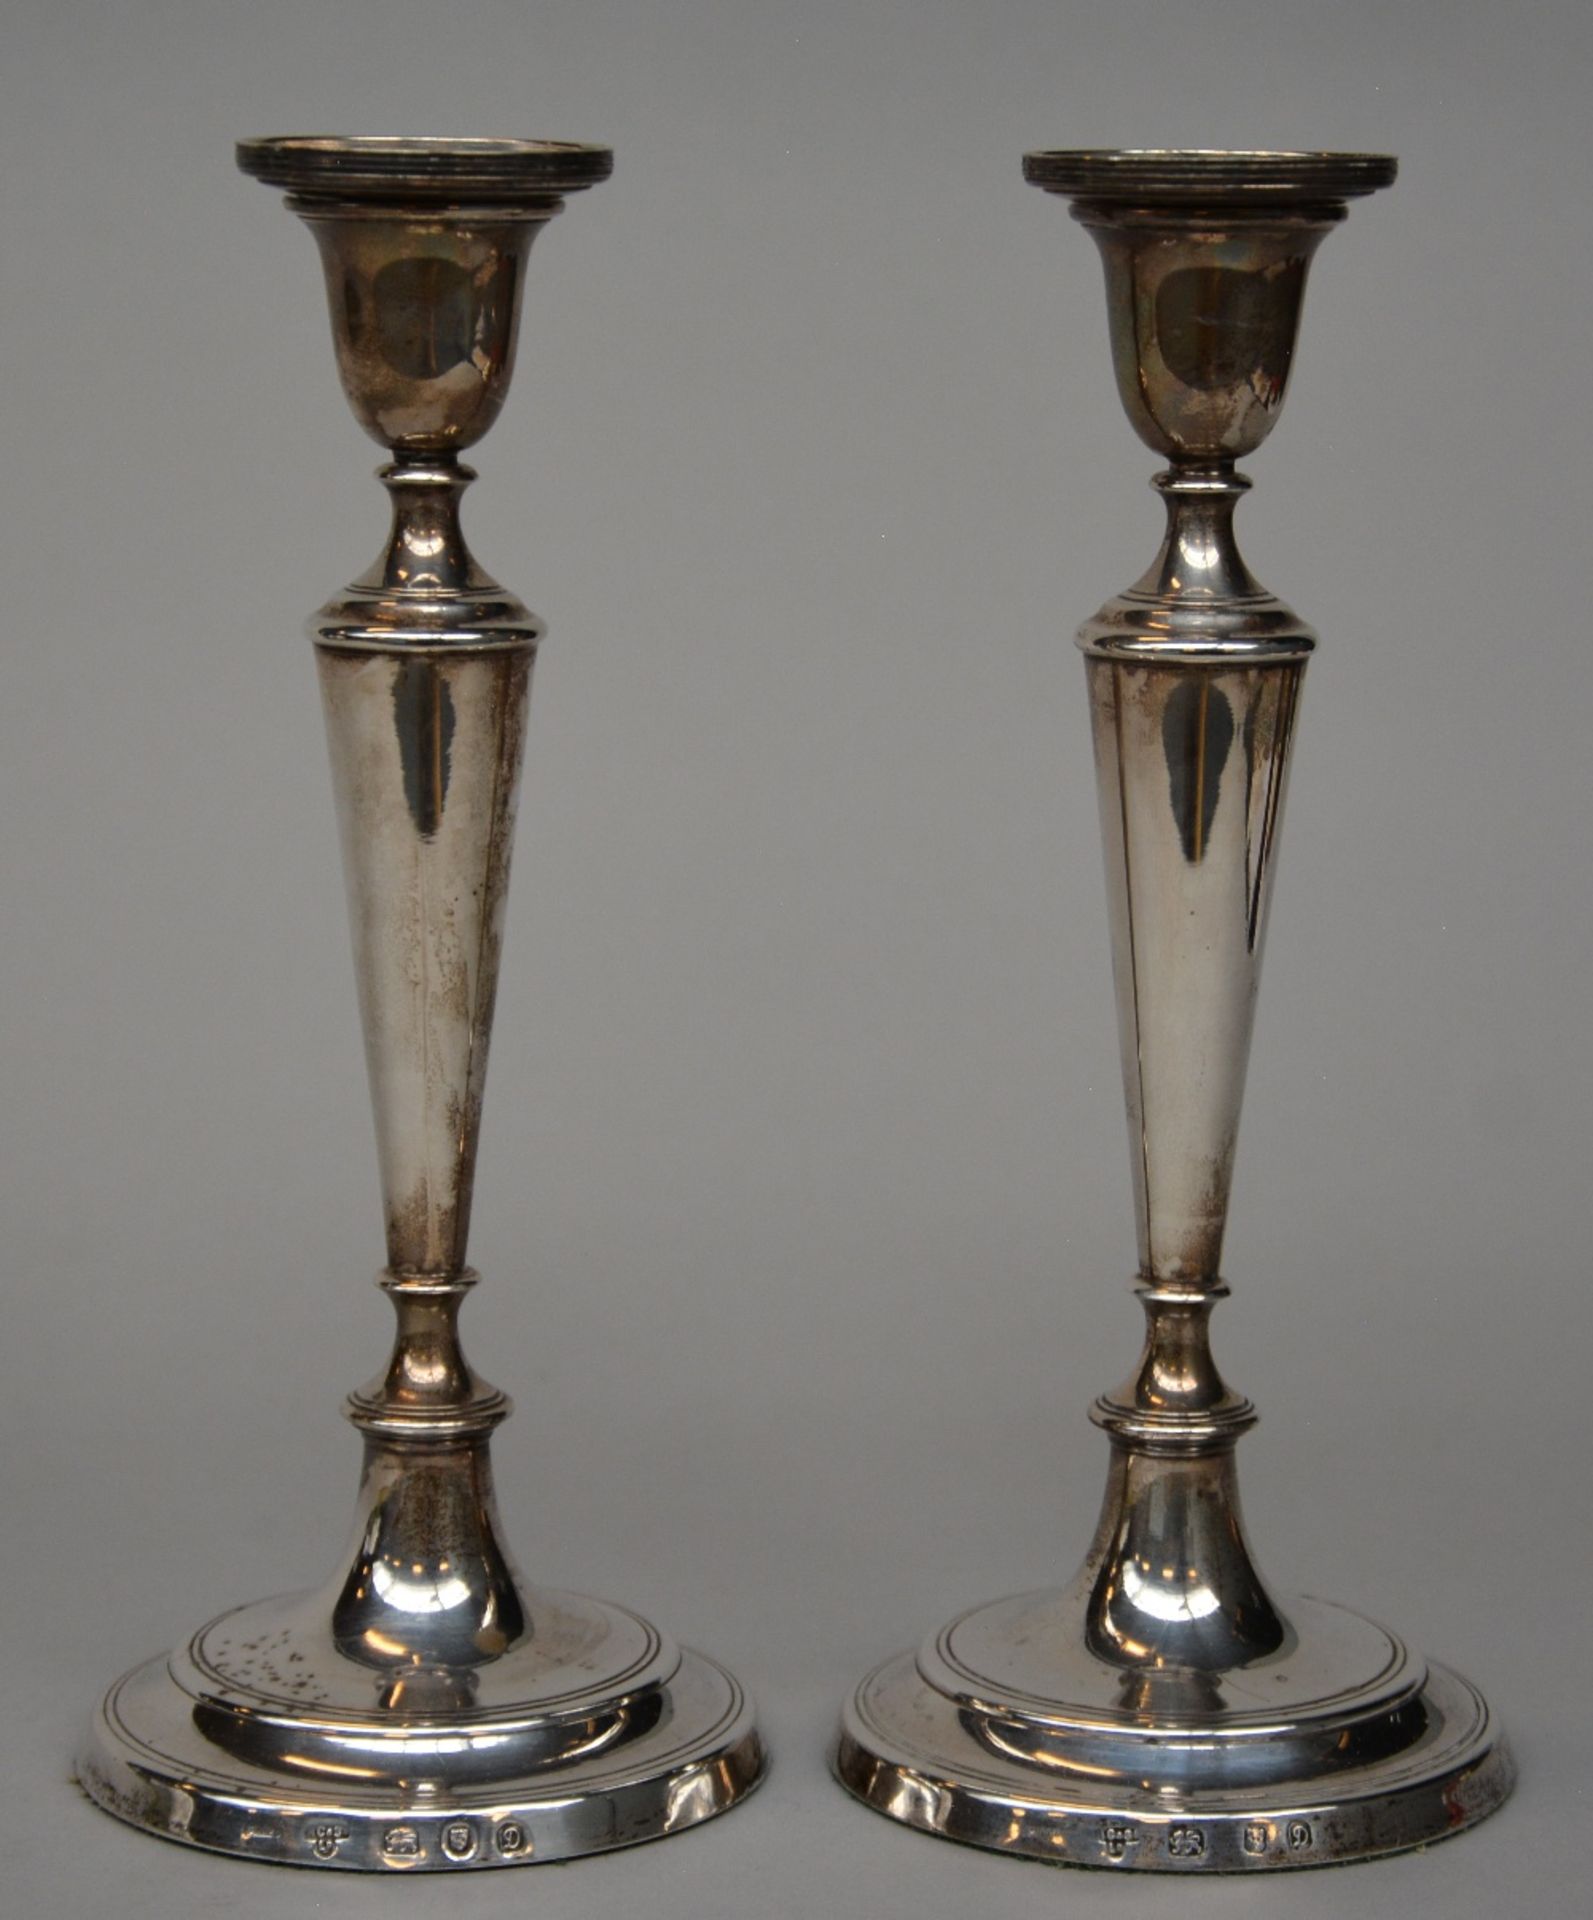 A pair of English Neo-classical silver candlesticks, hallmark London, dated 1978, H 23,5 cm, Total